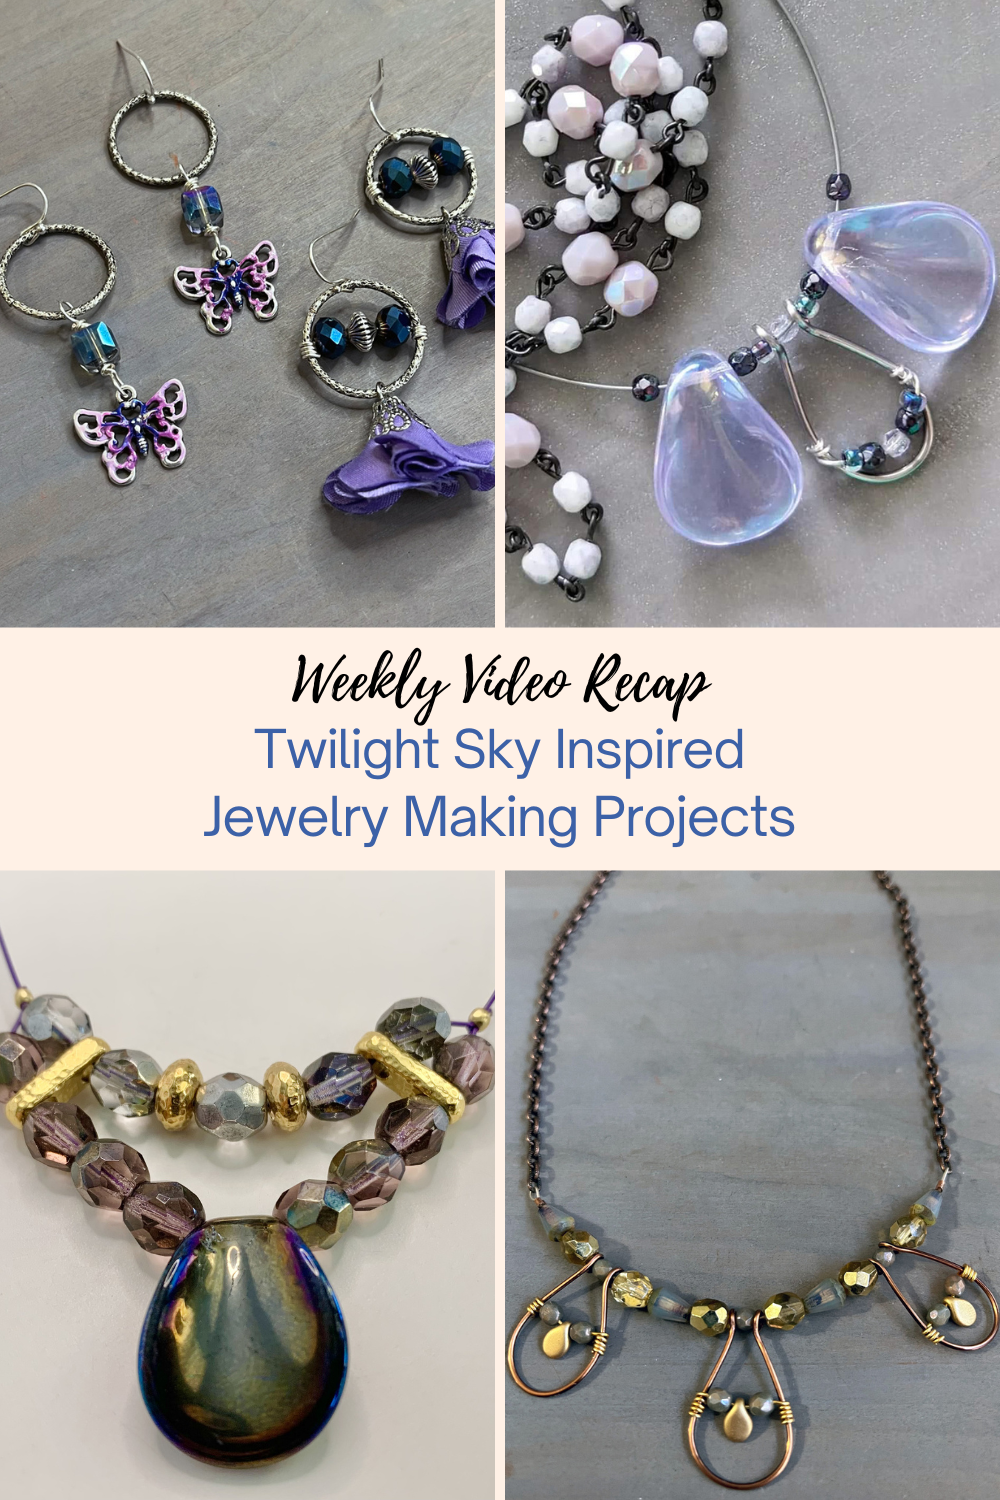 Twilight Sky Inspired Jewelry Making Projects Collage